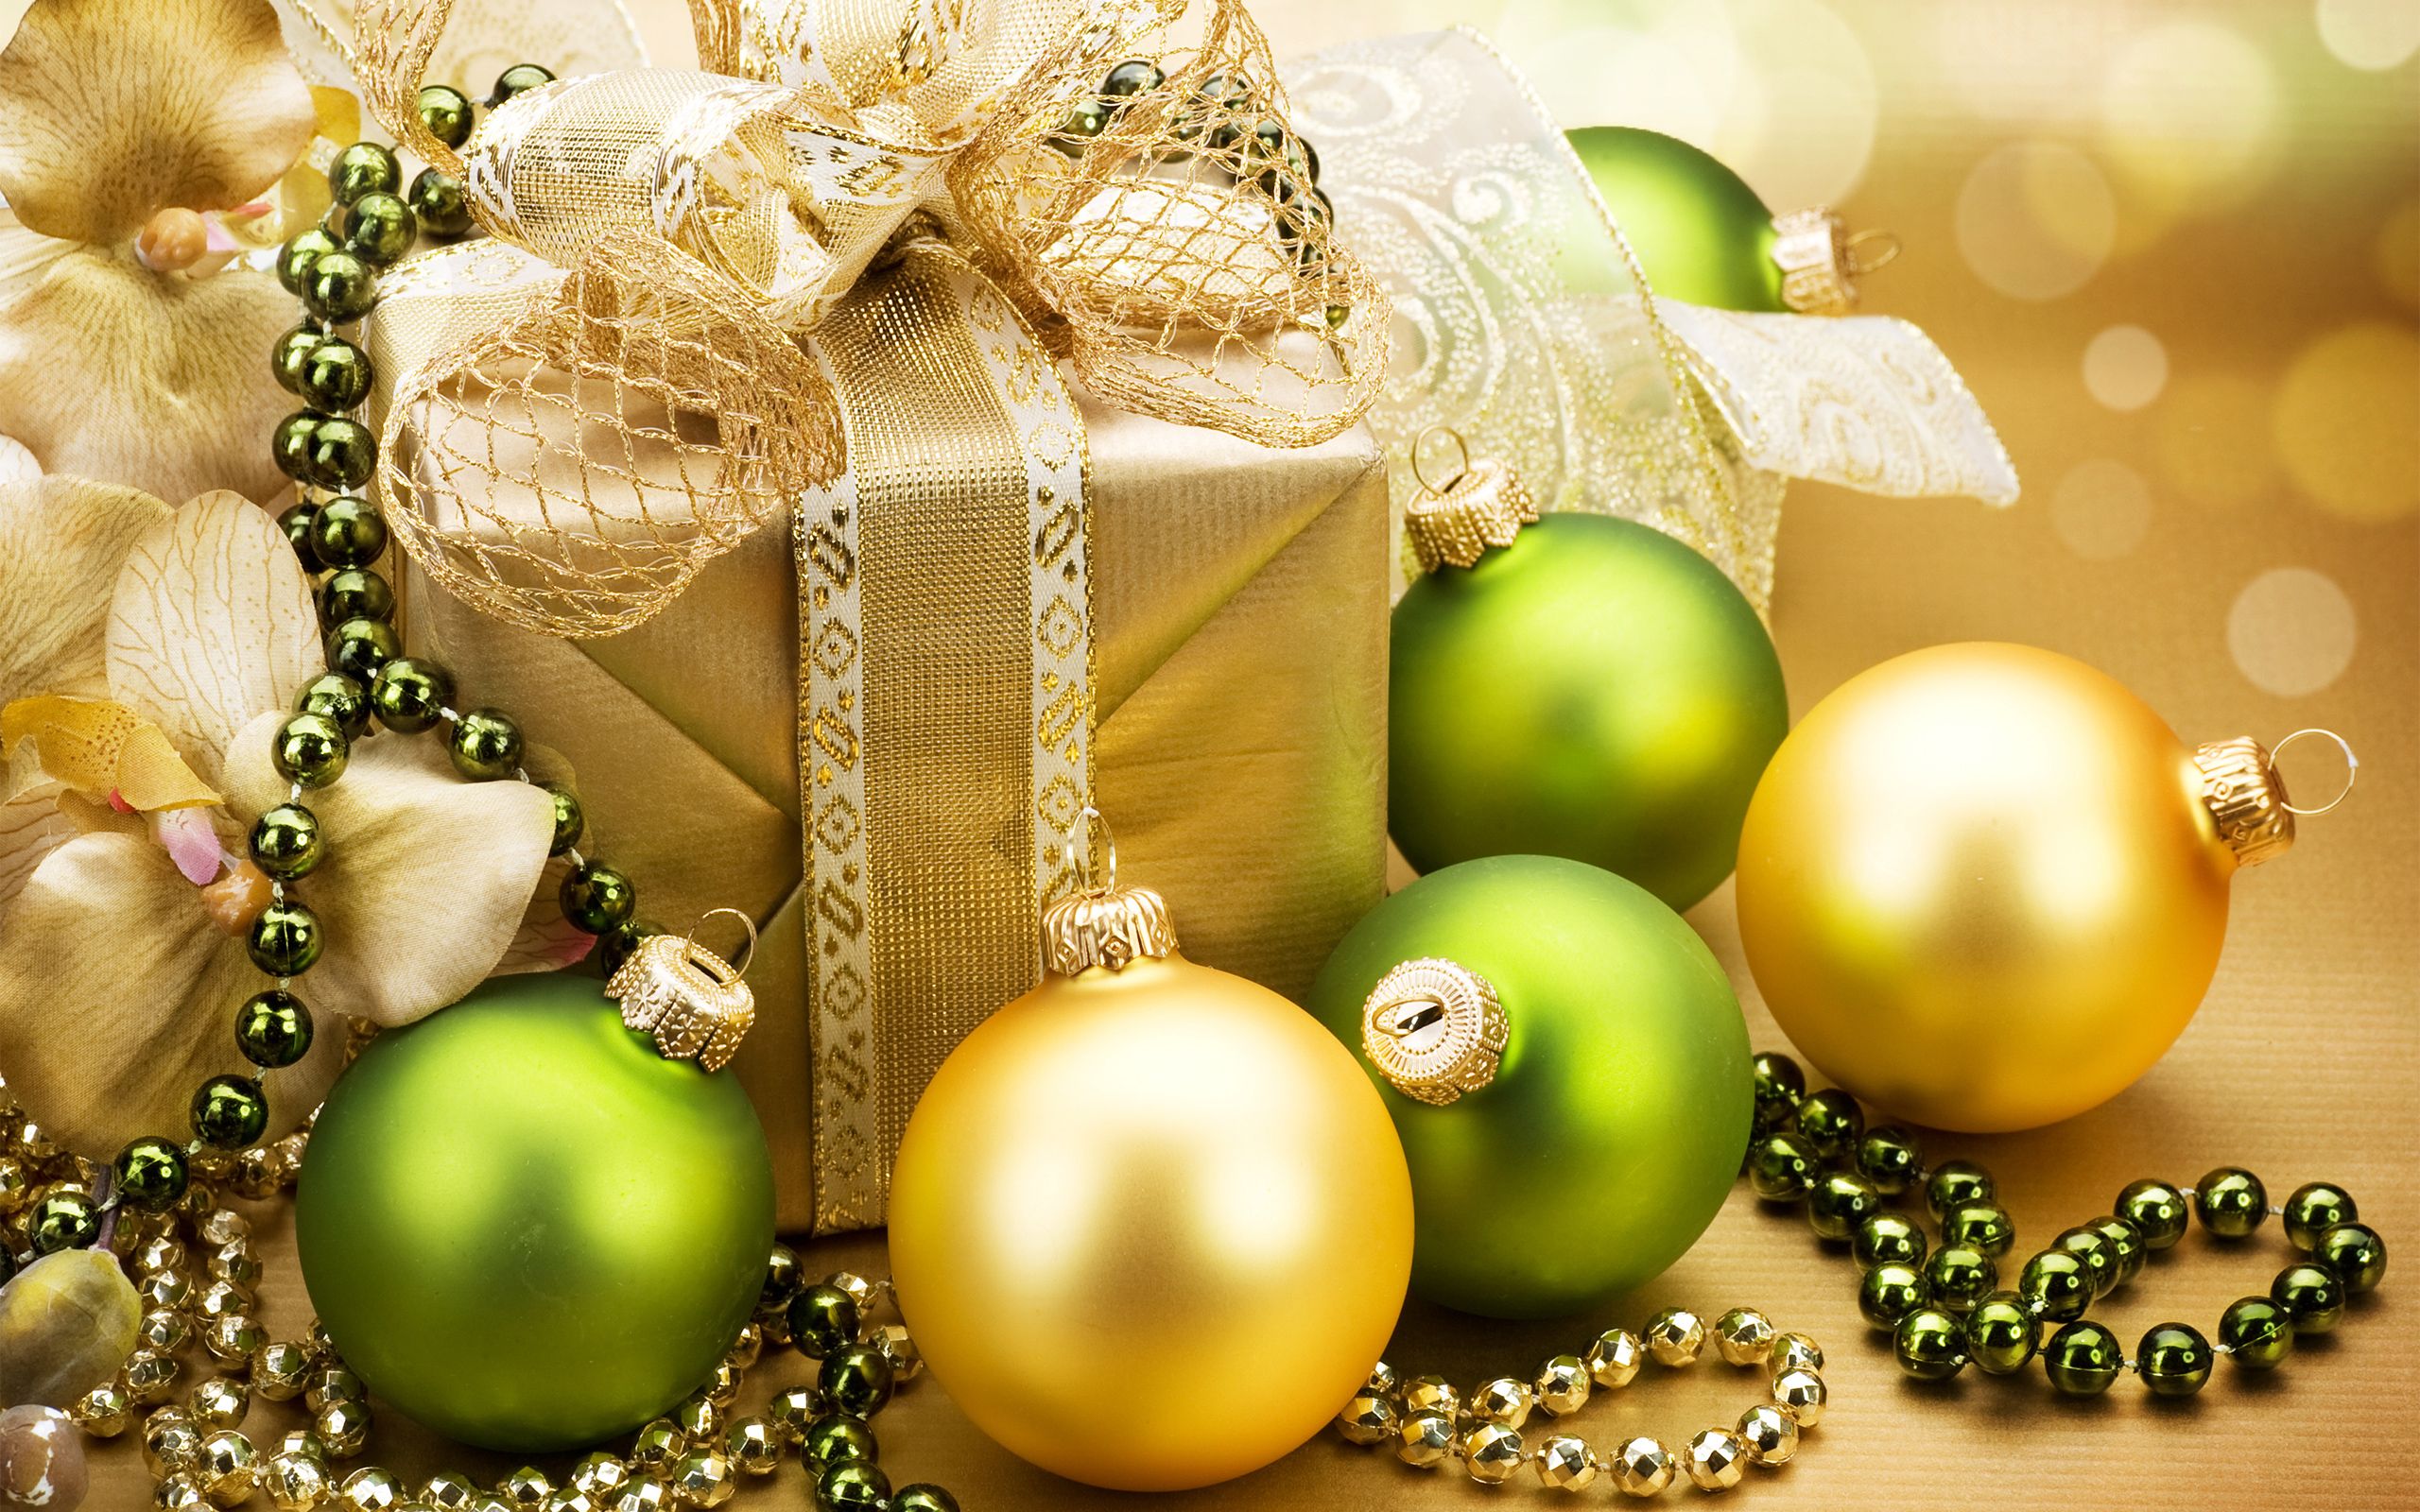 Christmas Wallpaper With Green And Gold Ornaments Quality Image And Transparent PNG Free Clipart